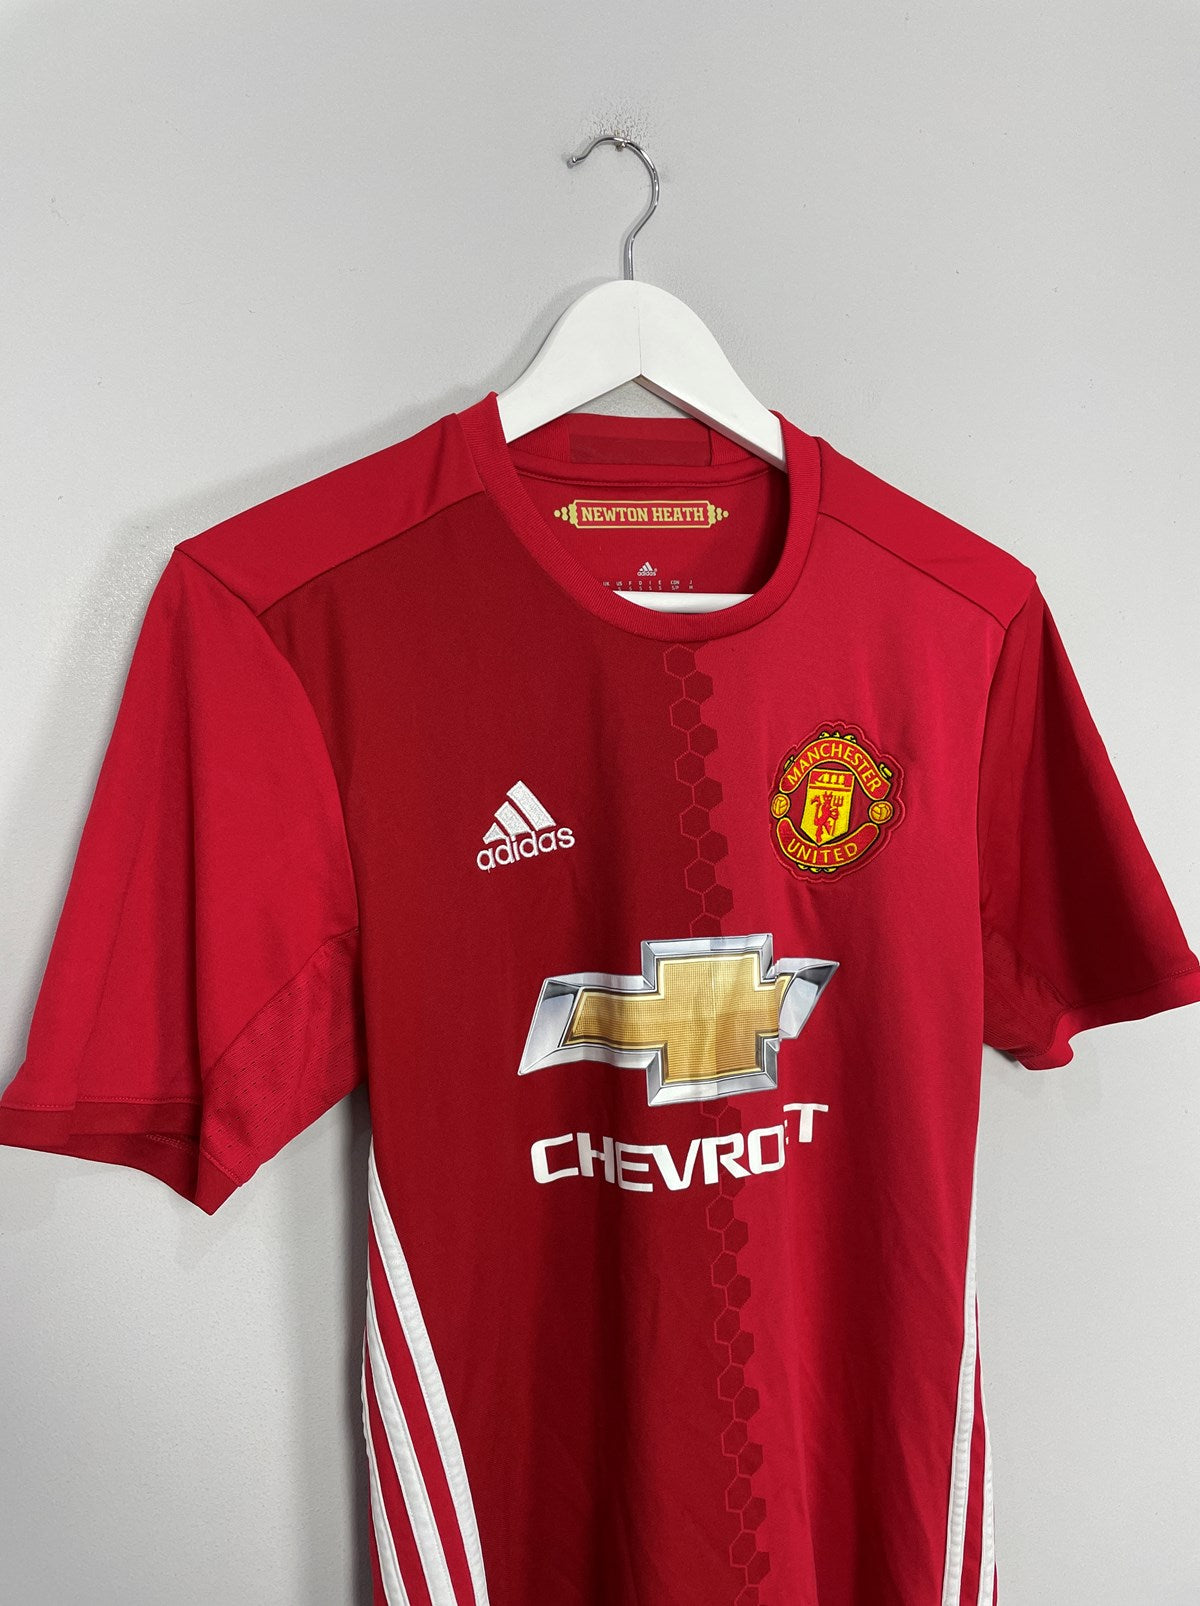 2016 17 Manchester United home Football Shirt - S